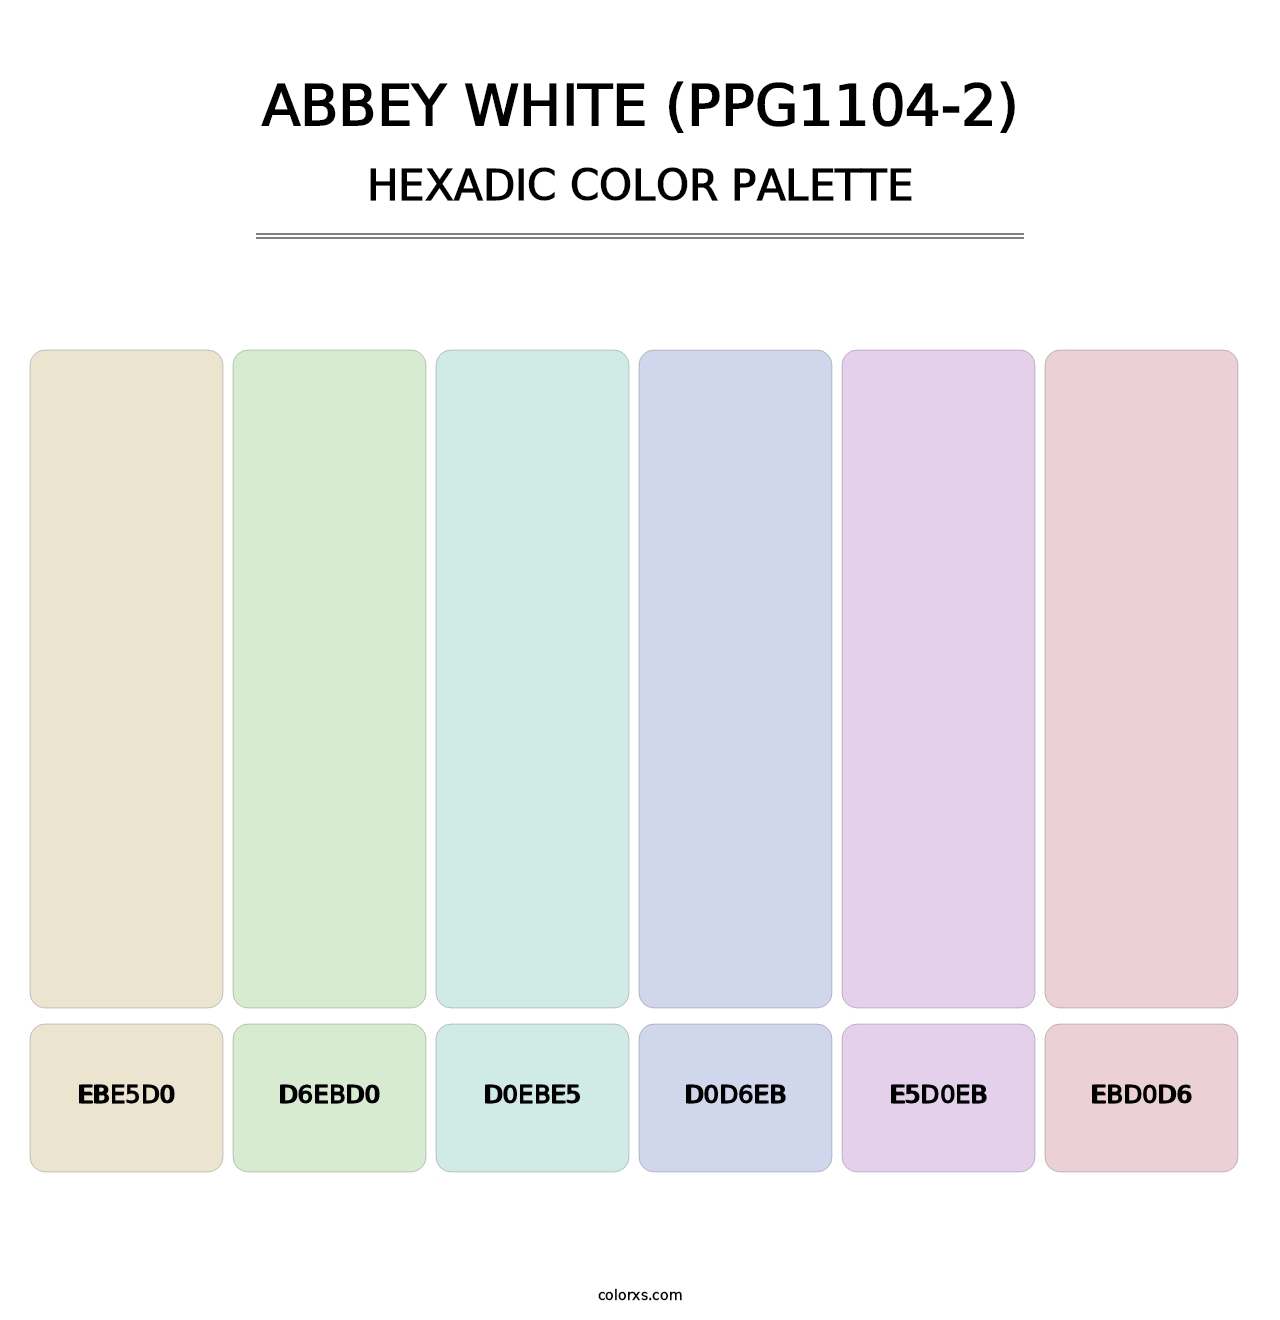 Abbey White (PPG1104-2) - Hexadic Color Palette